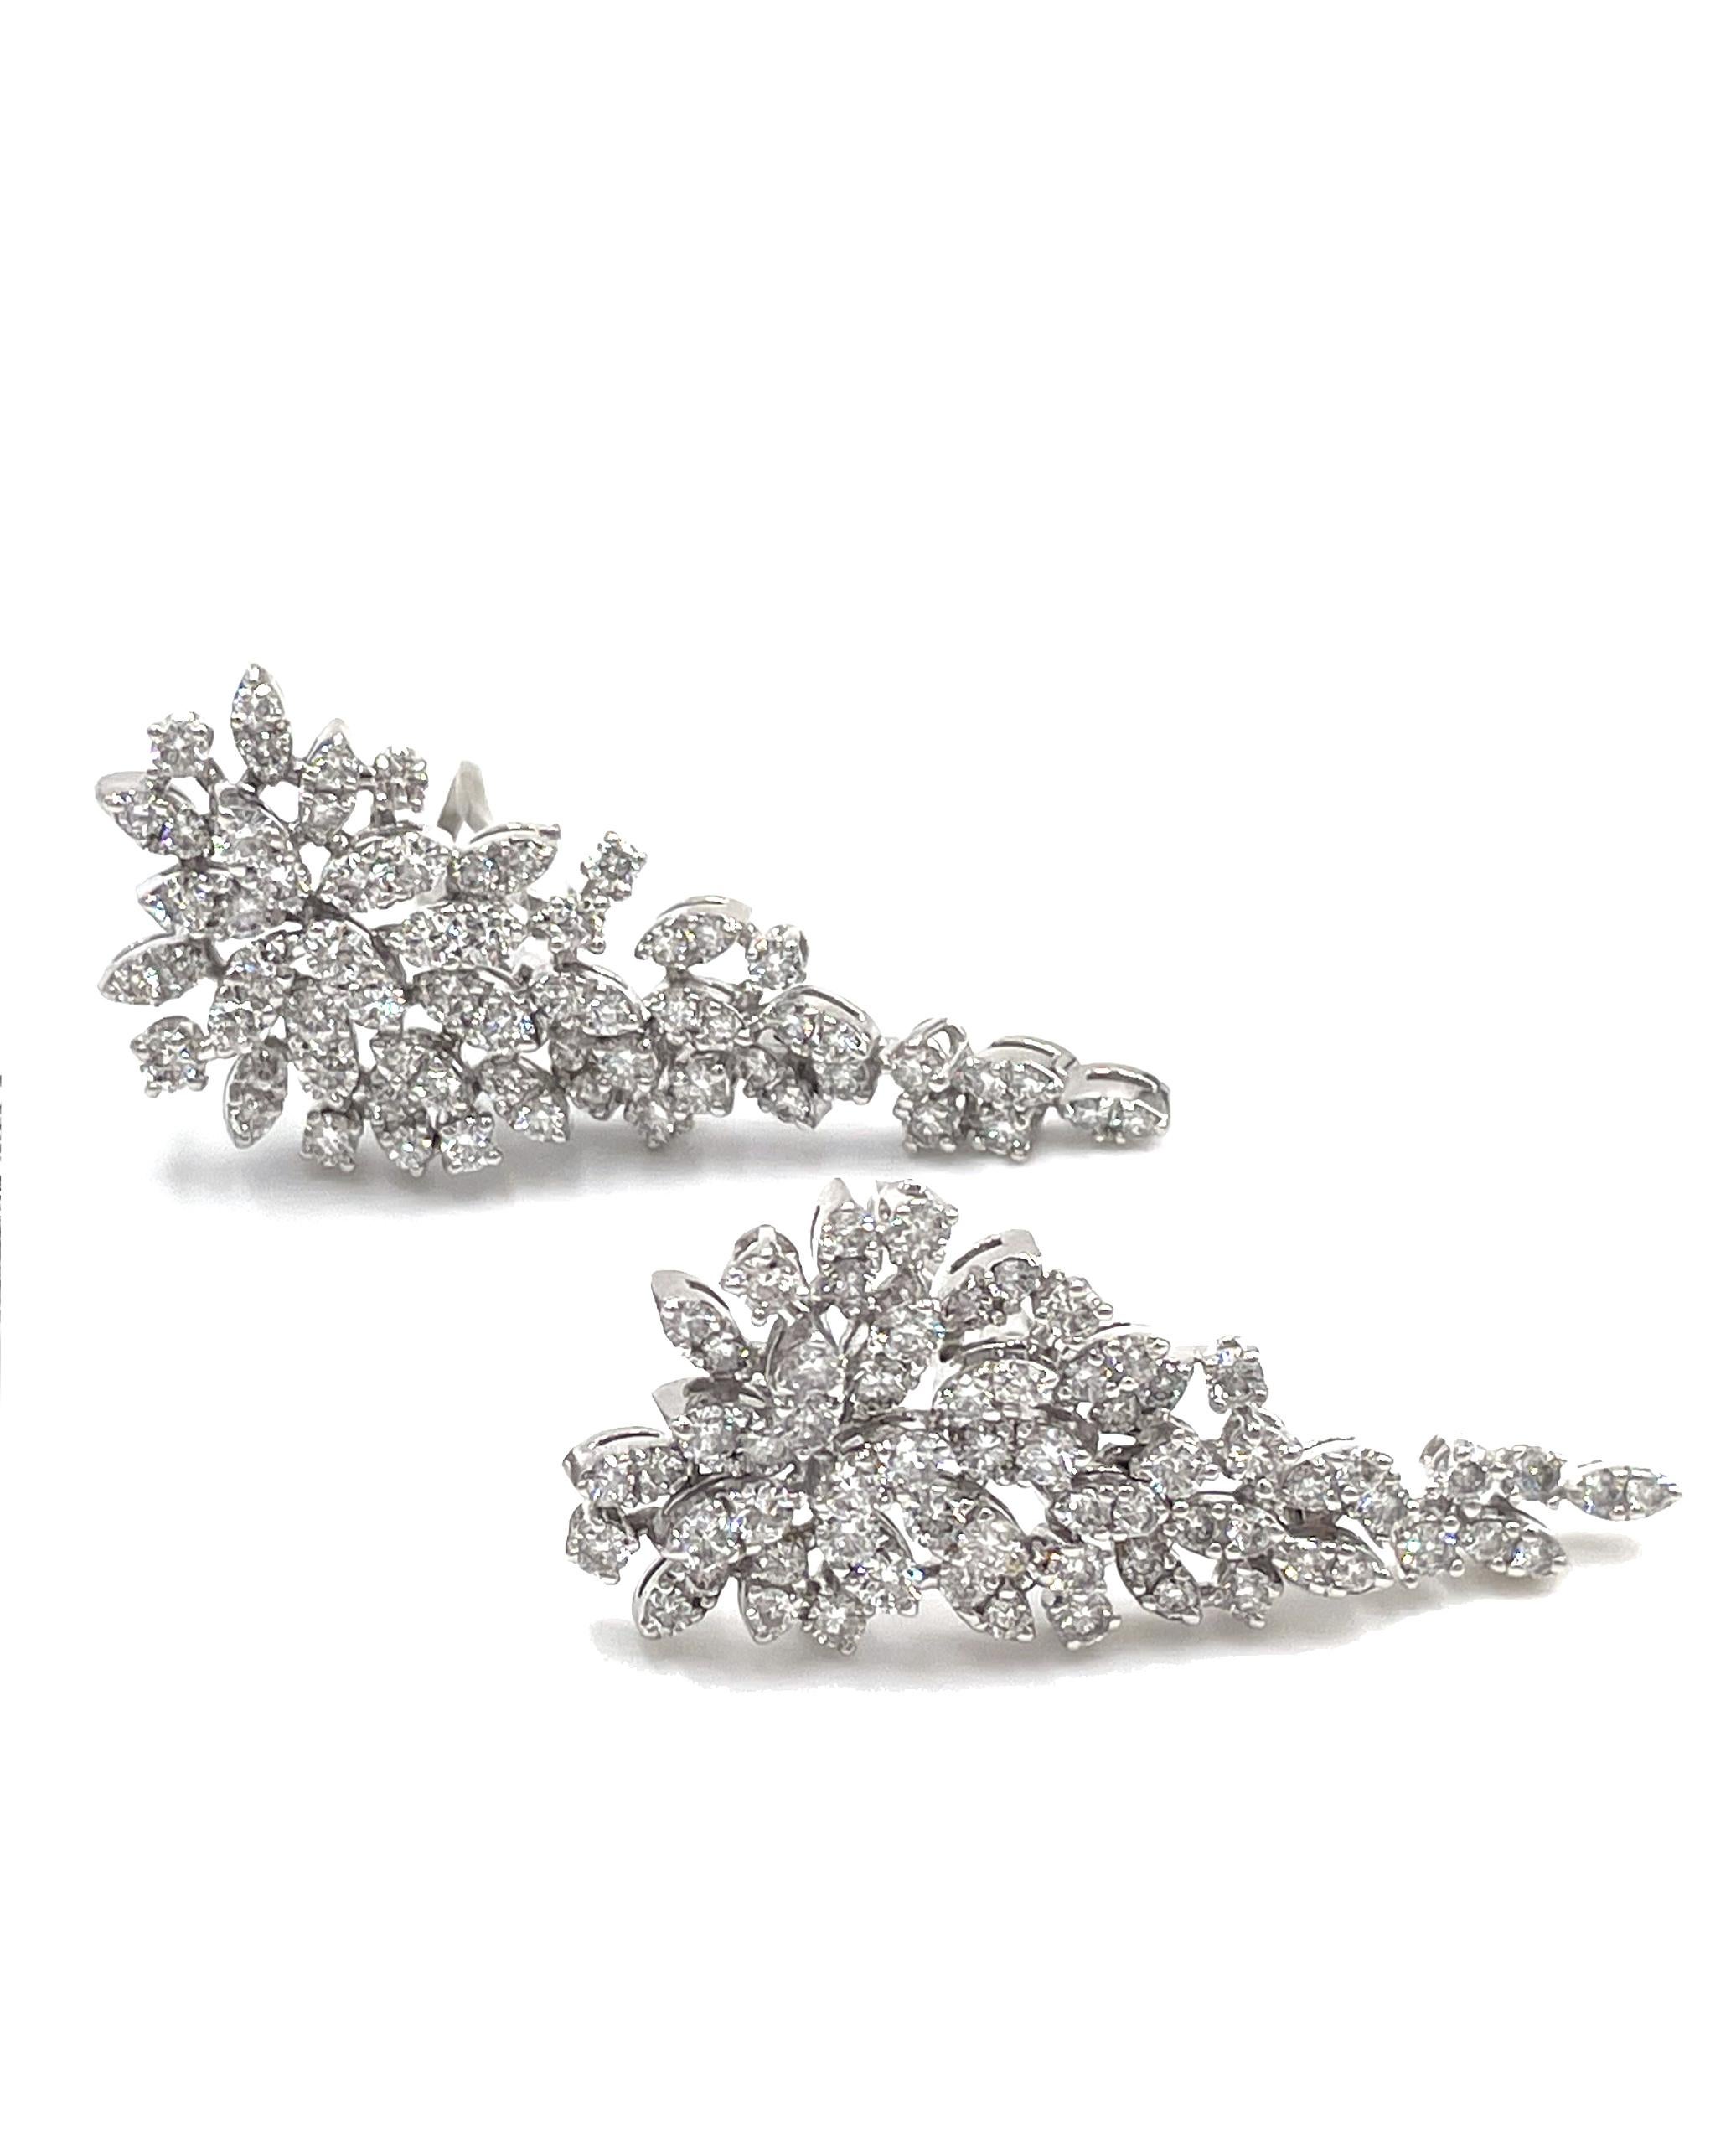 14K white gold fashion statement earrings with Omega backings.  The earrings are furnished with 116 round brilliant-cut diamonds weighing 3.81 carats total. 

* Diamonds are H color, SI clarity.